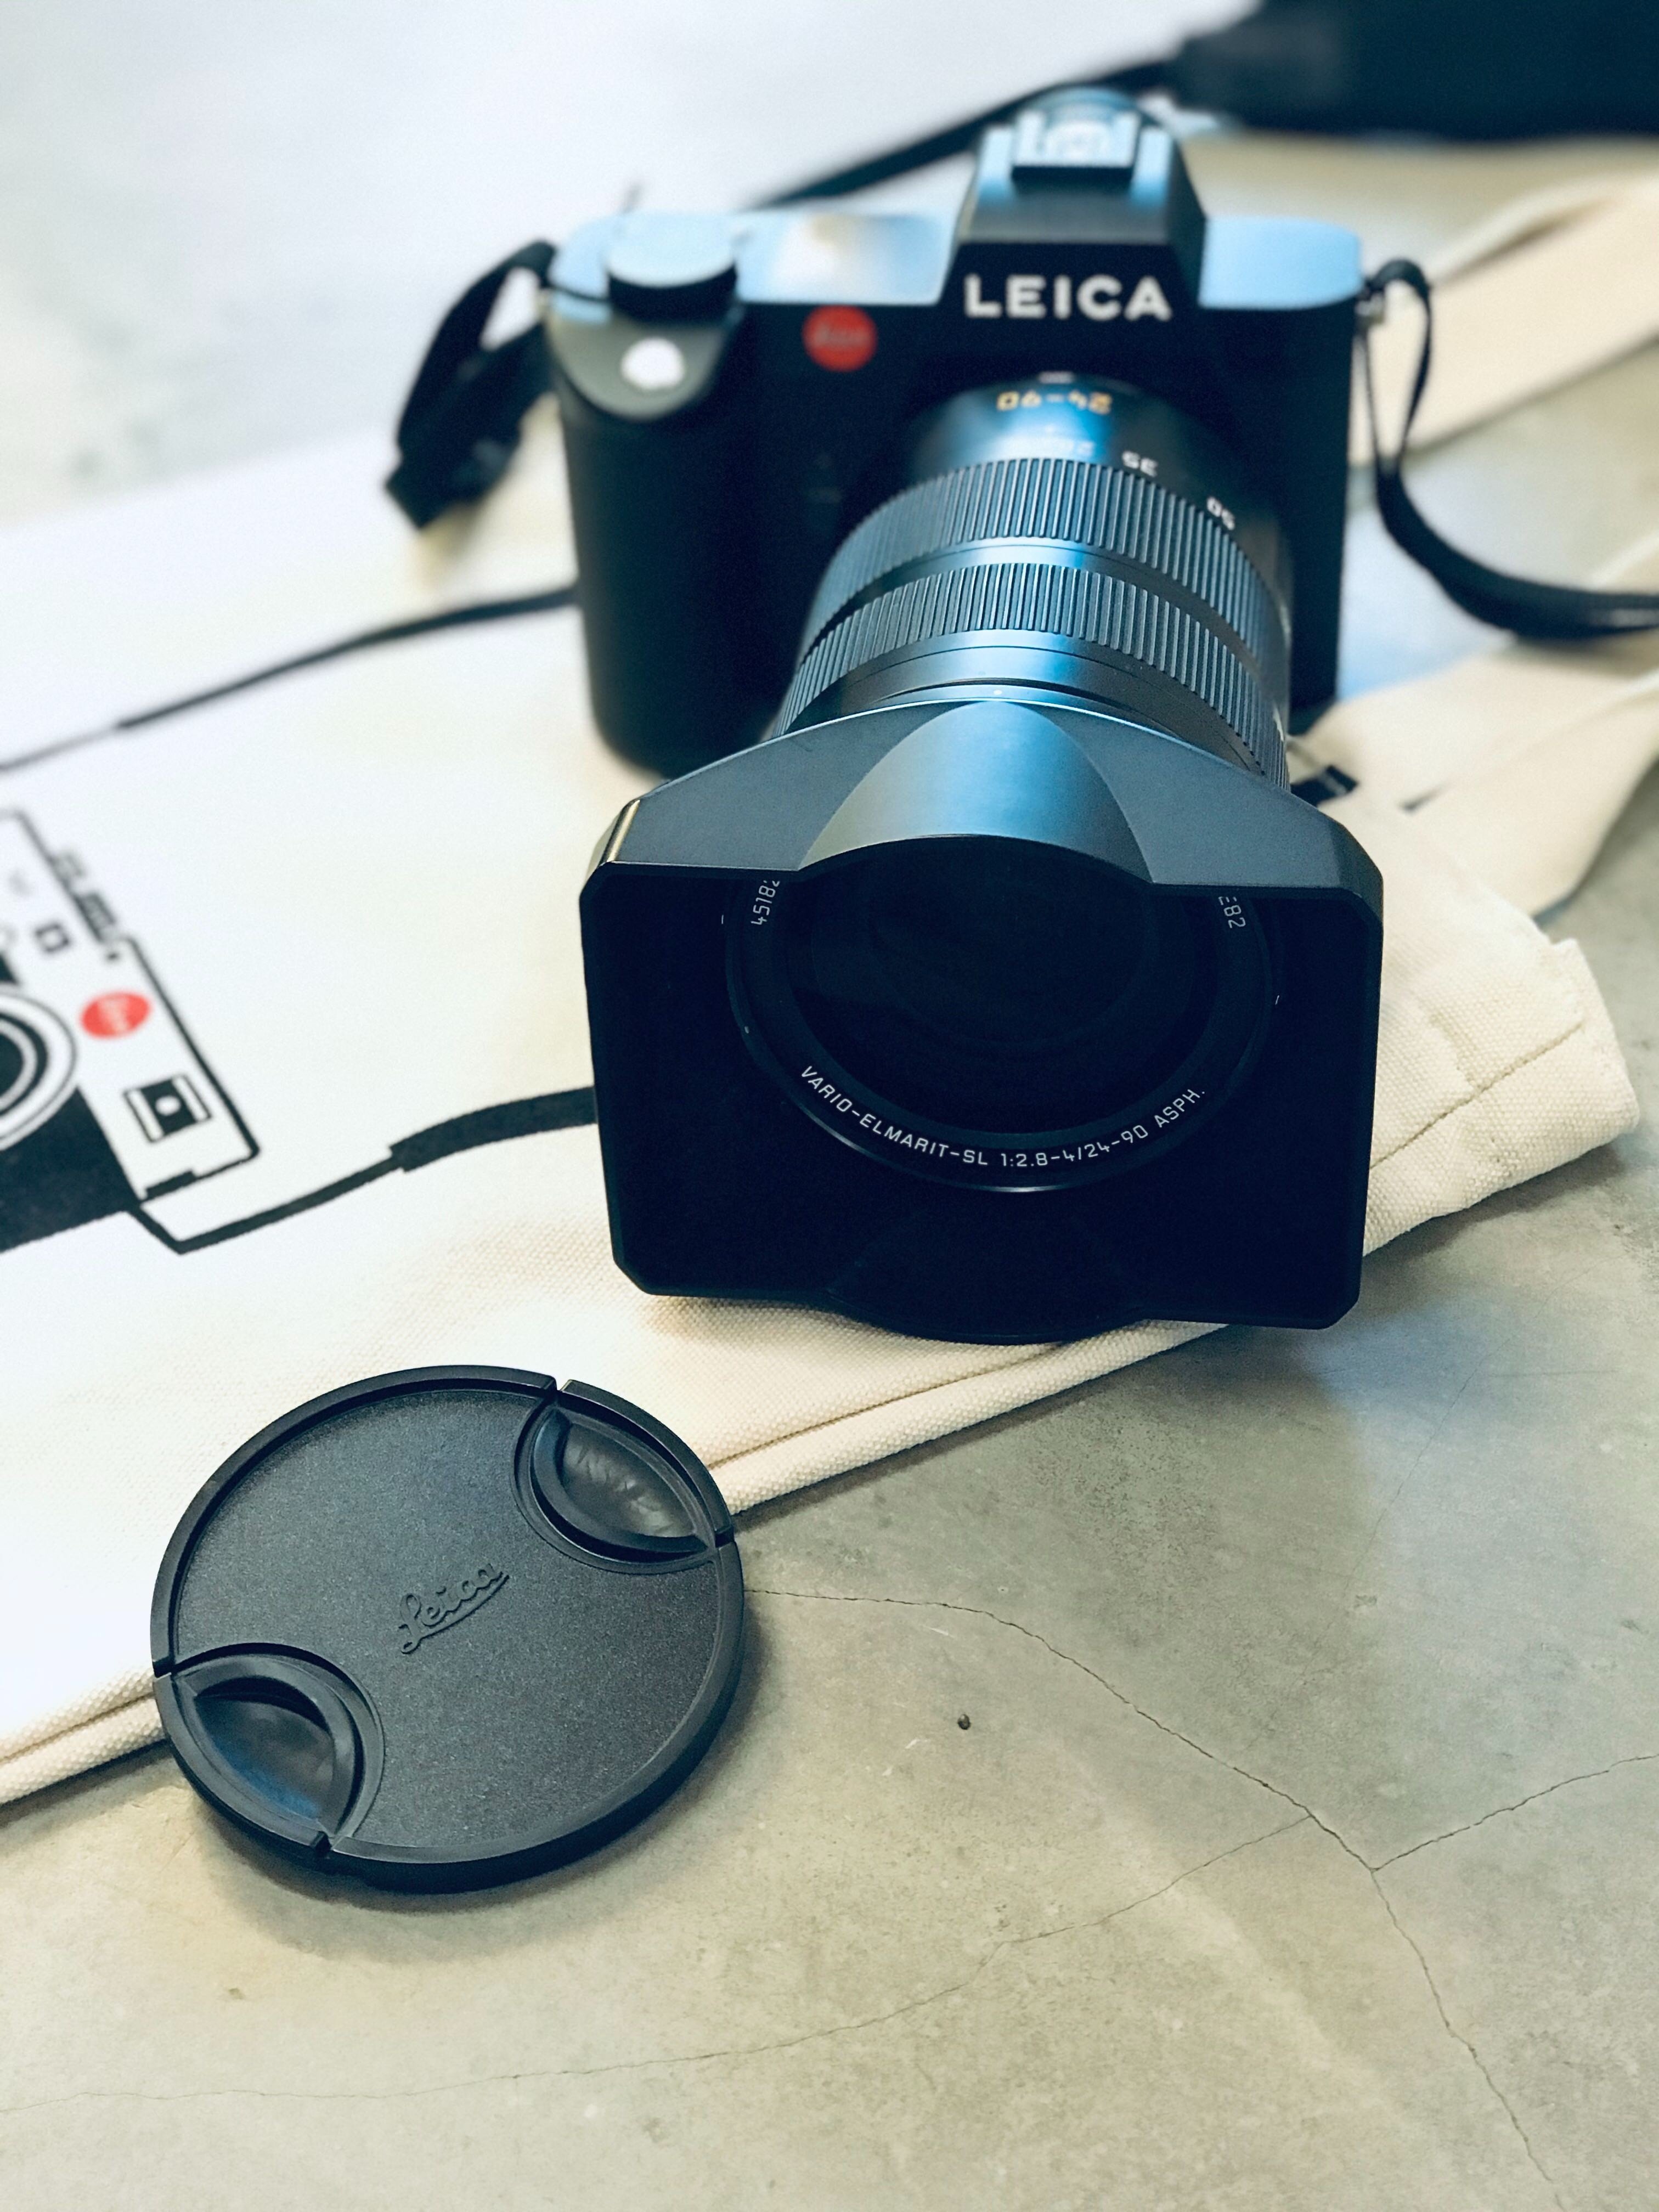 Leica SL2 – the iconic brand’s new top-end new digital camera threatens to raise the game – but is it really worth US$6,000-plus? Photo: SCMP